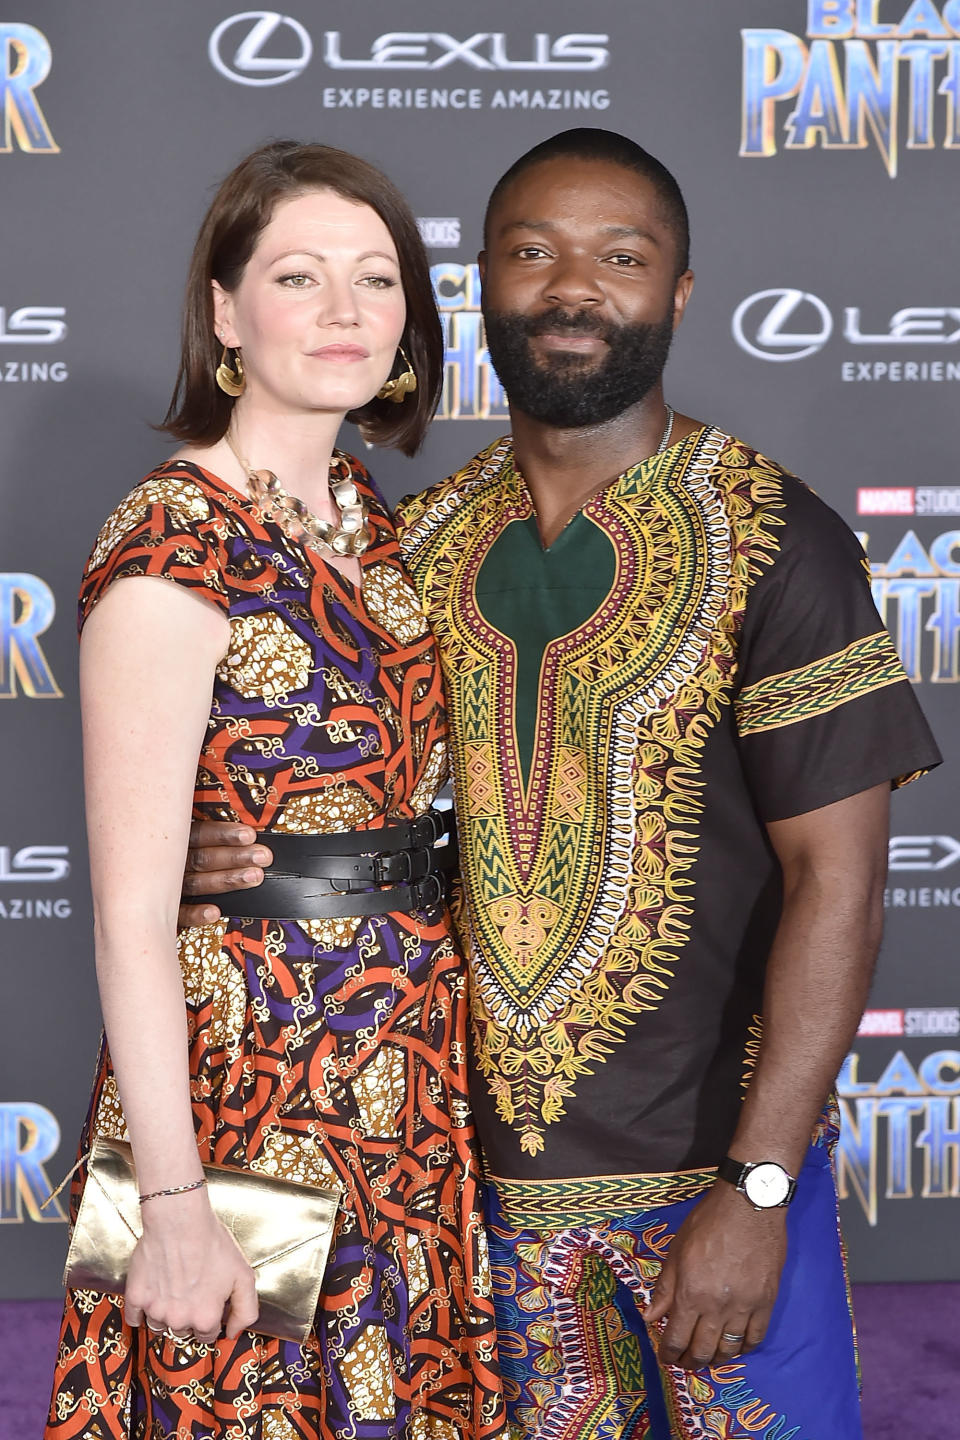 HOLLYWOOD, CA - JANUARY 29:  Jessica Oyelowo and David Oyelowo attend the Premiere Of Disney And Marvel's 'Black Panther' - Arrivals on January 29, 2018 in Hollywood, California.  (Photo by David Crotty/Patrick McMullan via Getty Images)